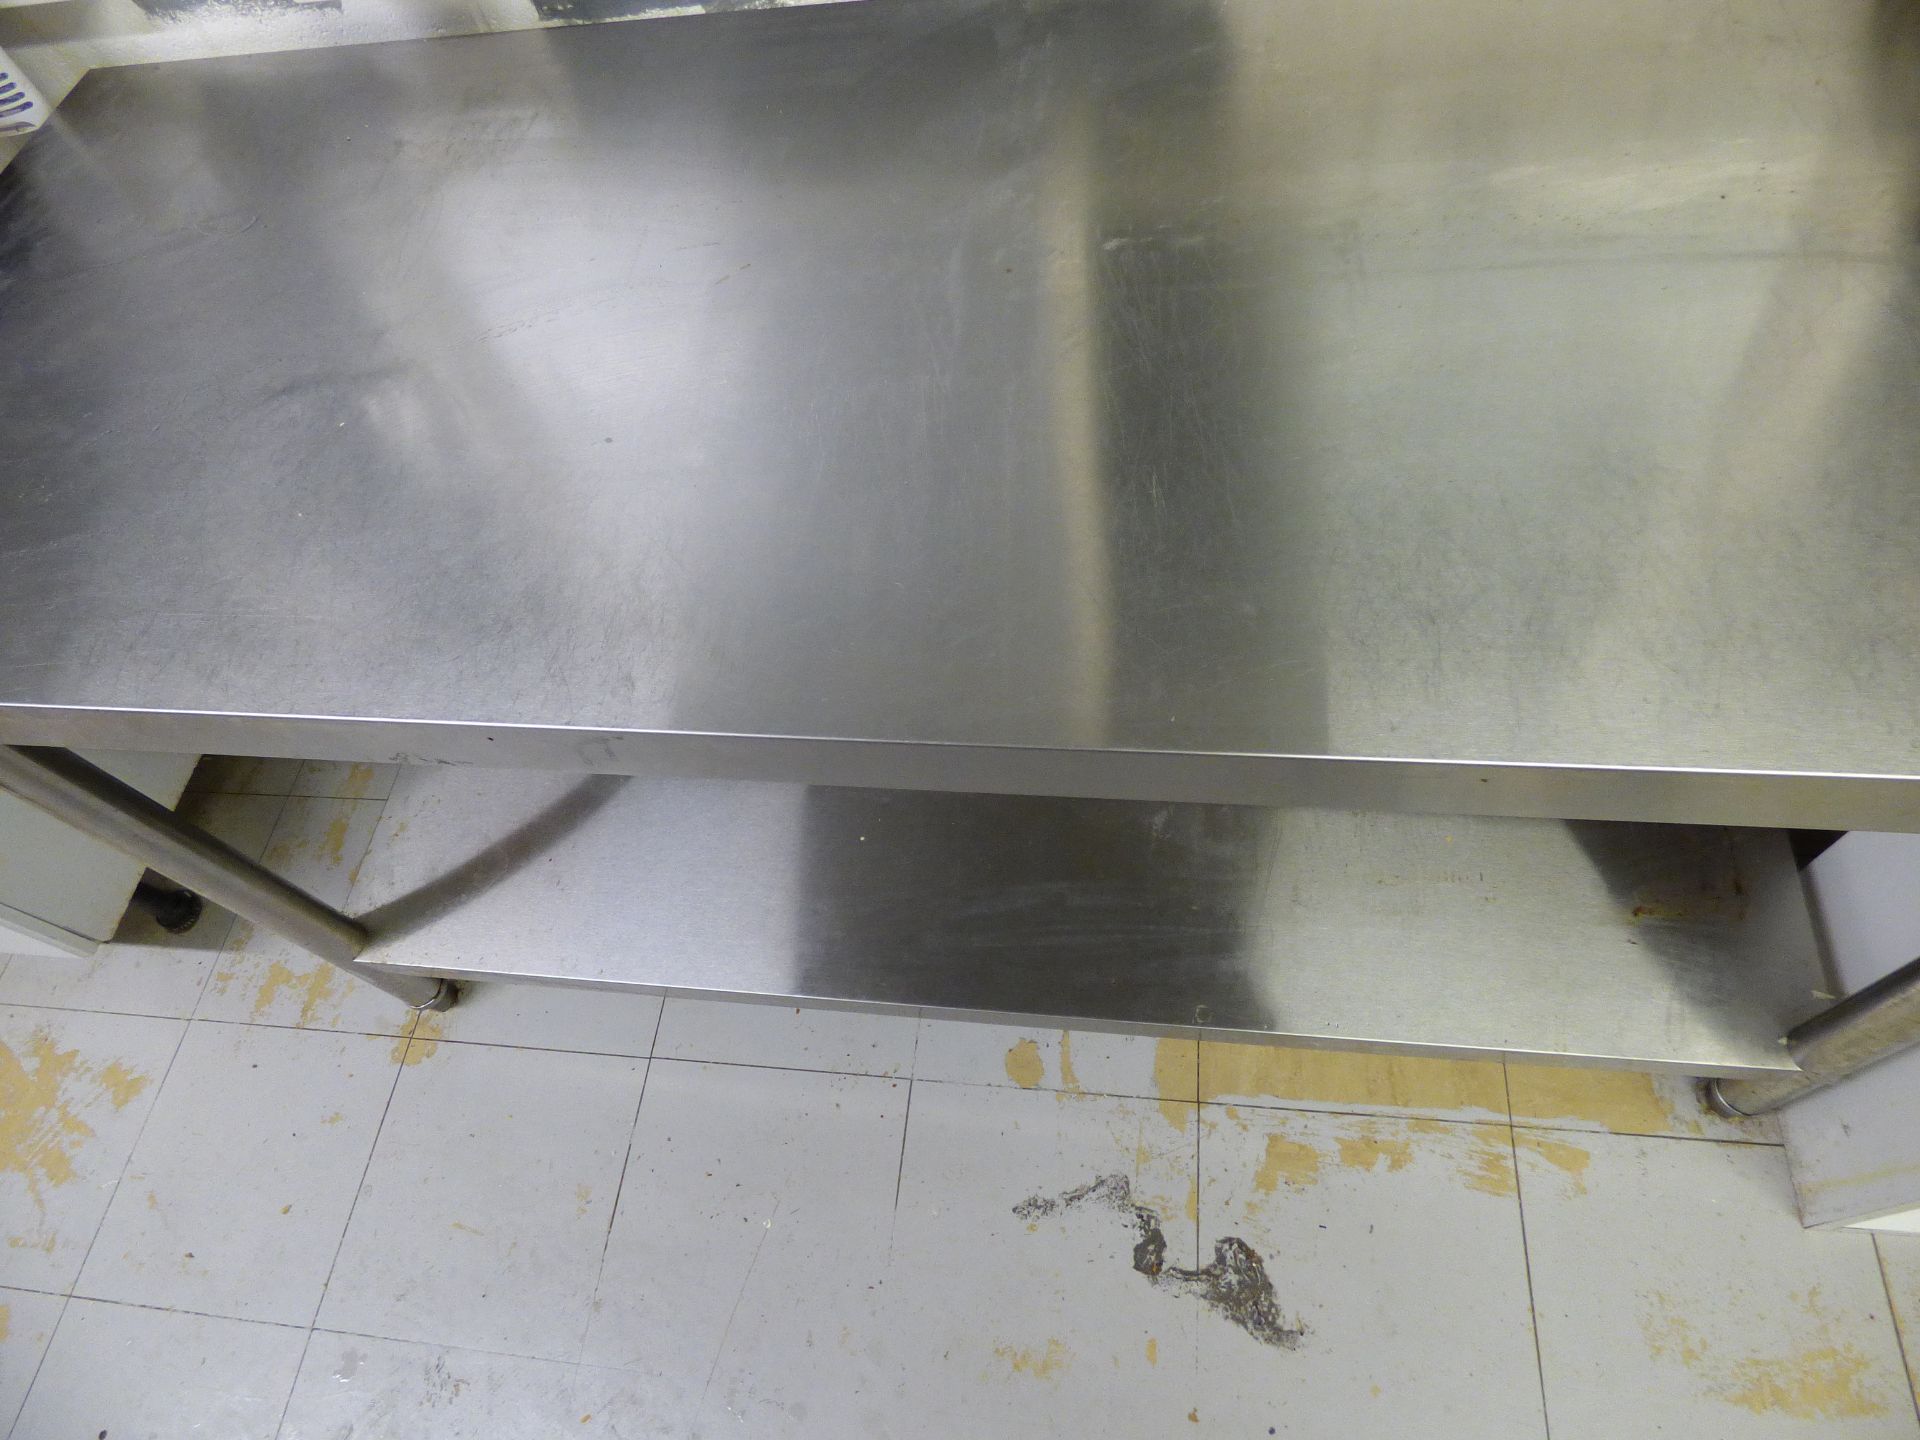 Stainless Steel Work Surface/Shelf Unit - Image 4 of 6